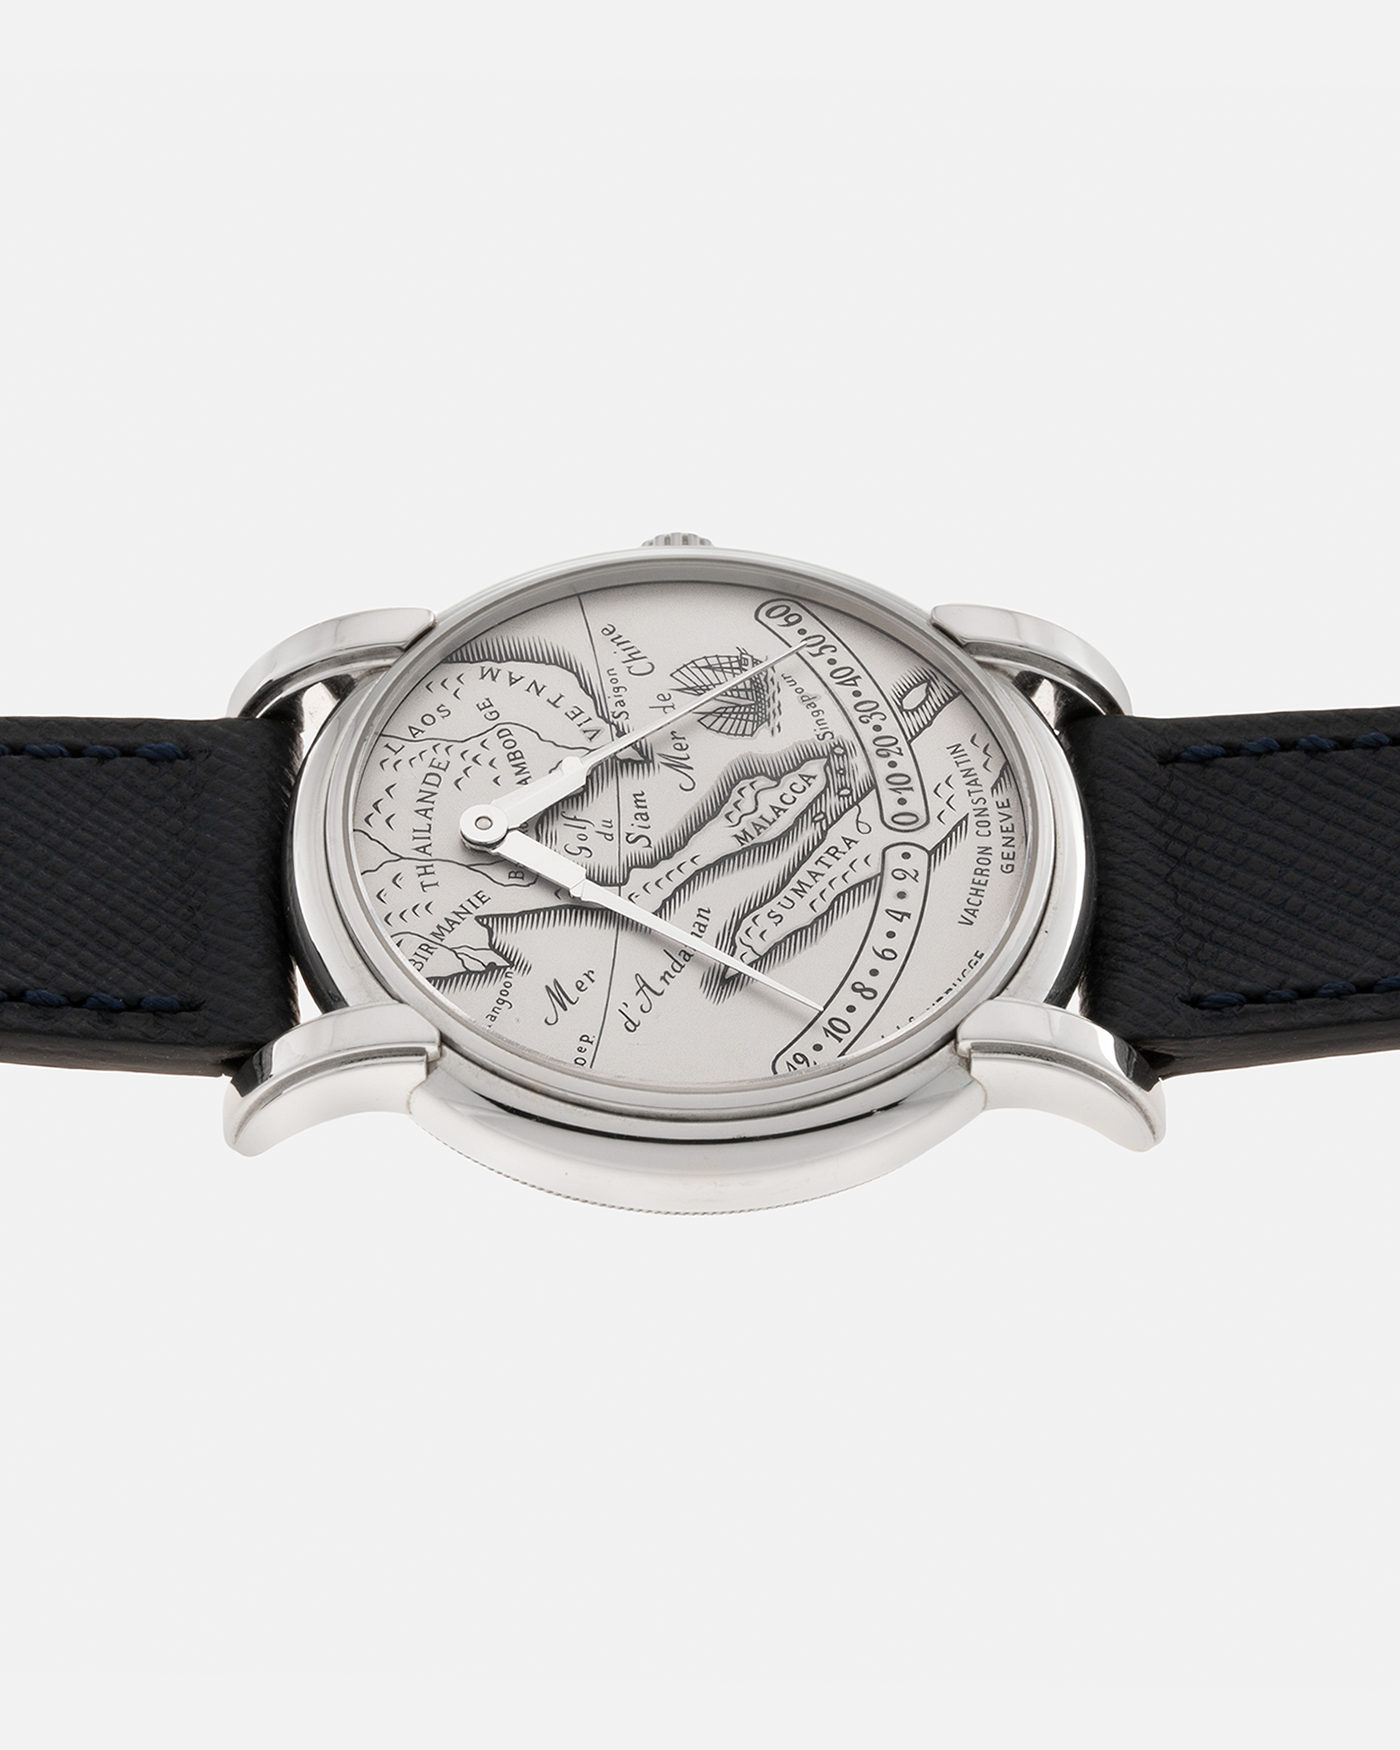 Brand: Vacheron Constantin Year: 1999 Model: Mercator, Southeast Asia Limited Edition of 20 pieces Reference Number: 43050 Material: Platinum Movement: Vacheron Constantin Cal. 1120 M (JLC Cal. 920 derived), Self-Winding Case Diameter: 36mm Lug Width: 19mm Strap: Molequin Navy Blue Textured Calf Leather Strap with Signed 18-carat White Gold Deployant Clasp